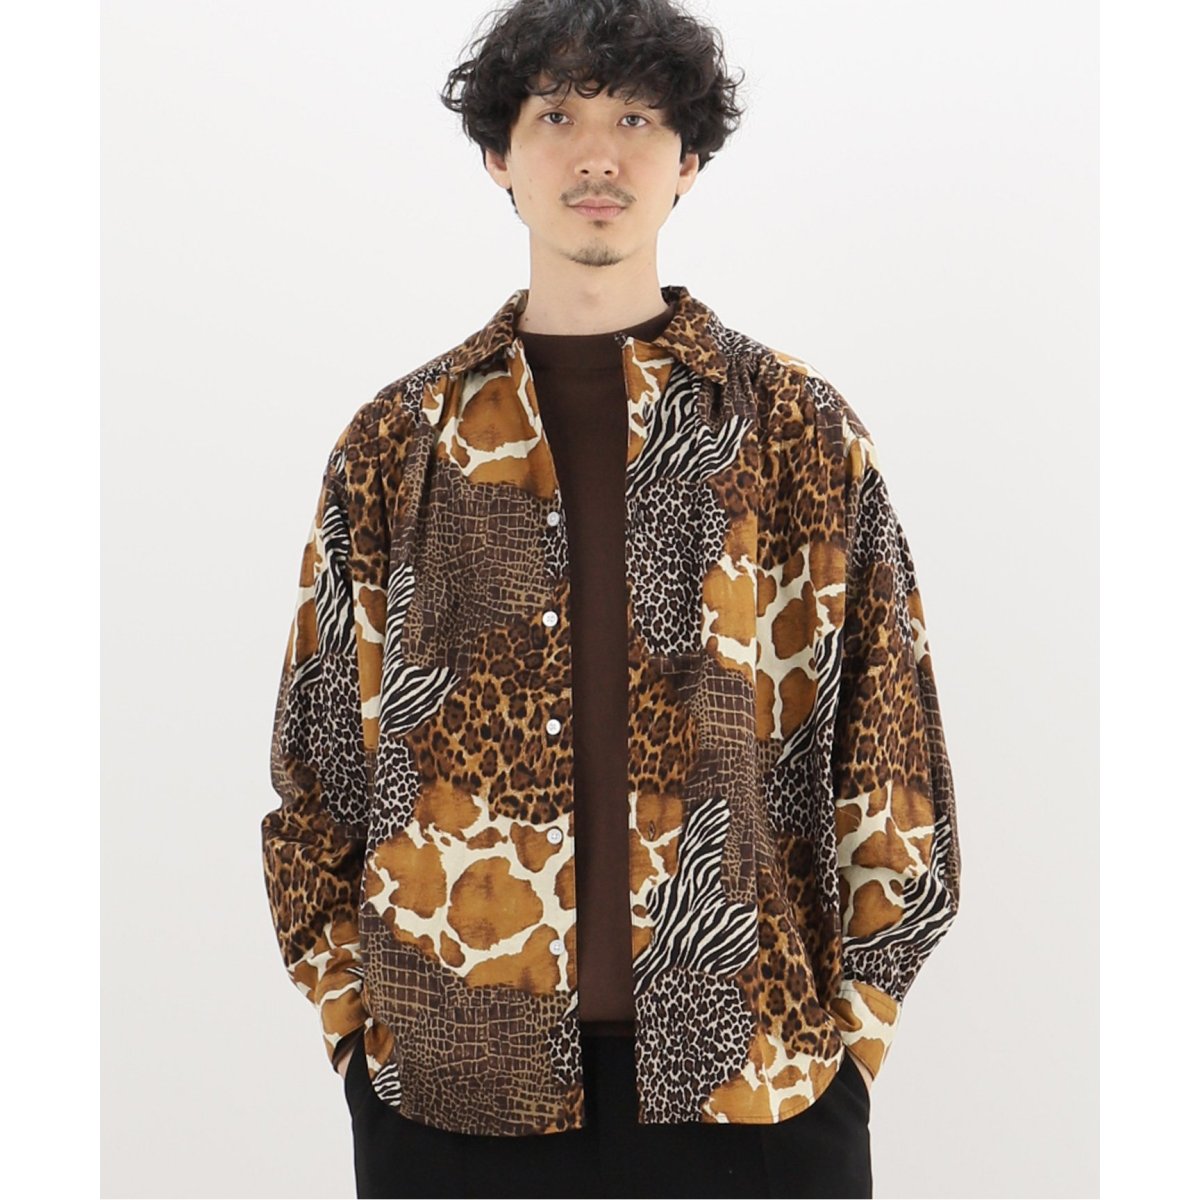 AIE PAINTER SHIRT ANIMAL PATCHWORK | 417 エディフィス(417 EDIFICE ...